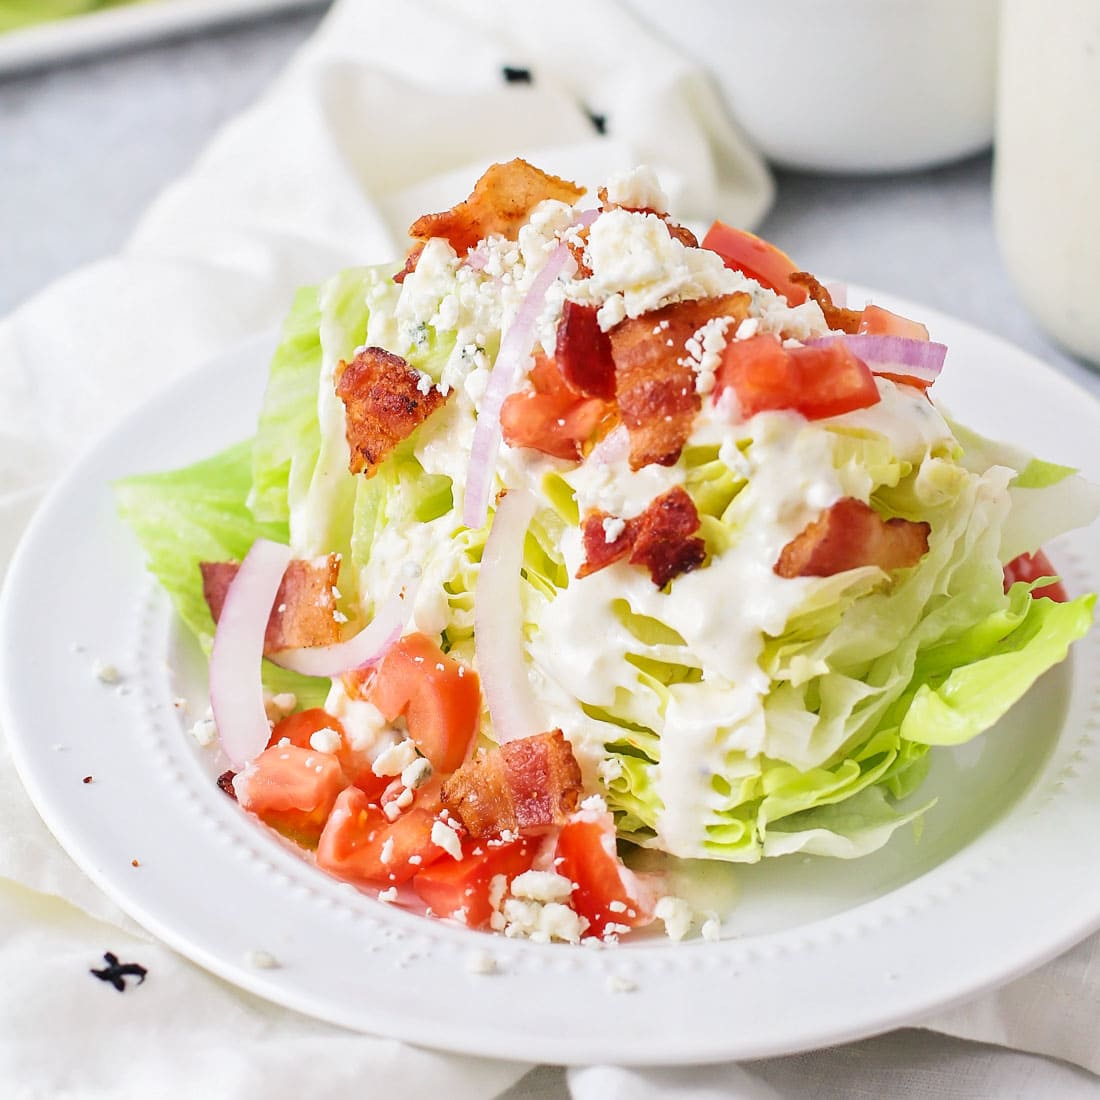 Christmas dinner ideas - wedge salad topped with bacon and dressing.